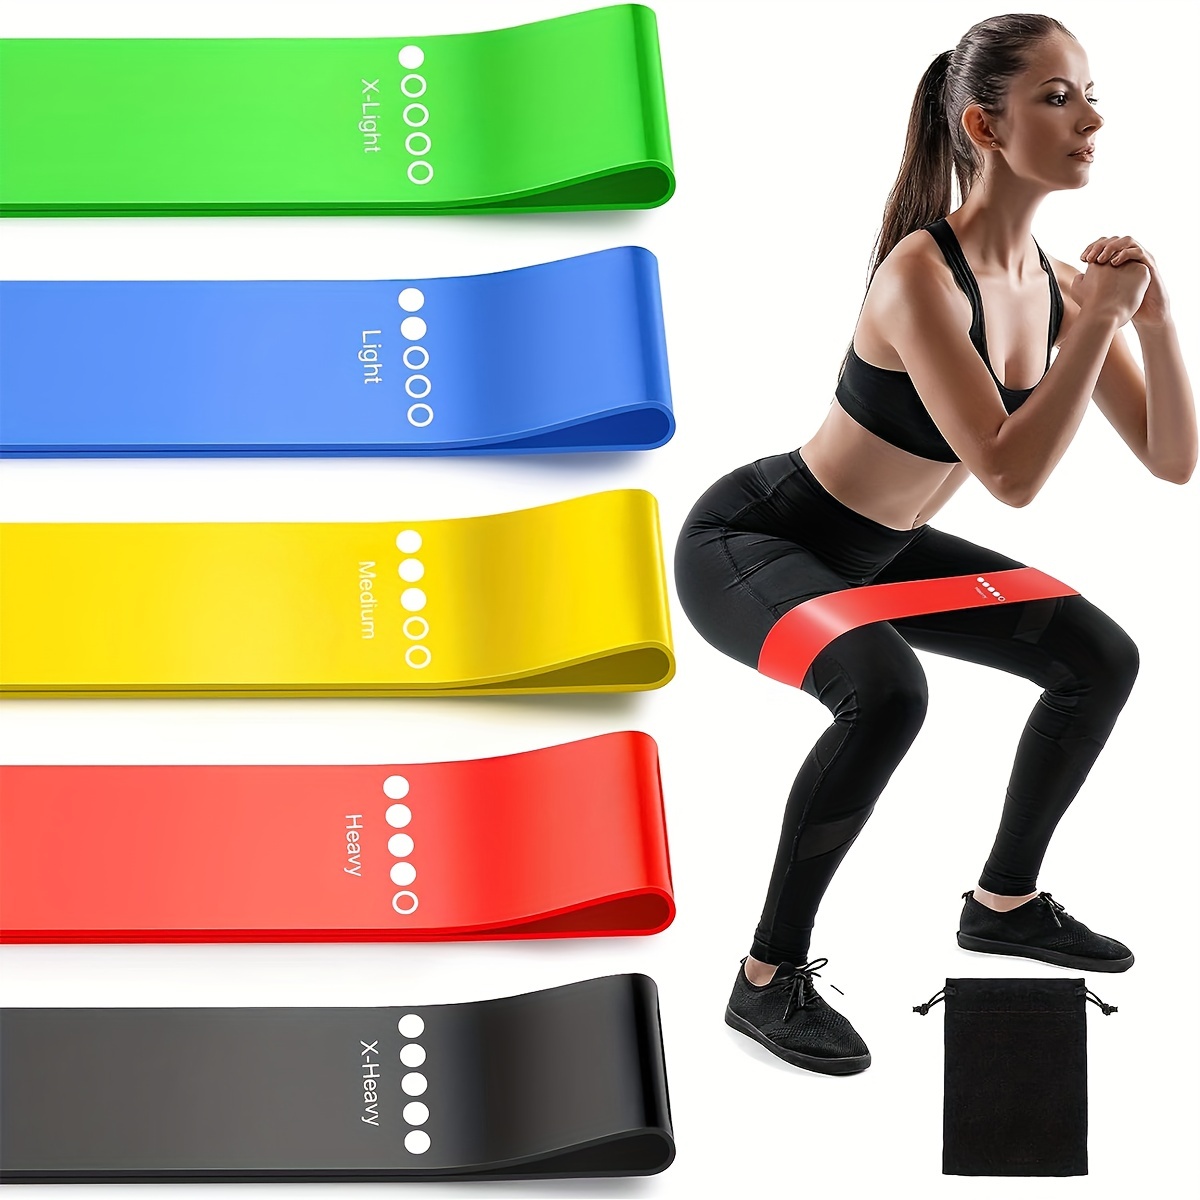  Gofypel Resistance Bands Exercise Bands Professional Elastic  Band for Legs Butt Glutes Yoga Stretching Strap Strength Training Physical  Therapy Pilates Traning : Sports & Outdoors